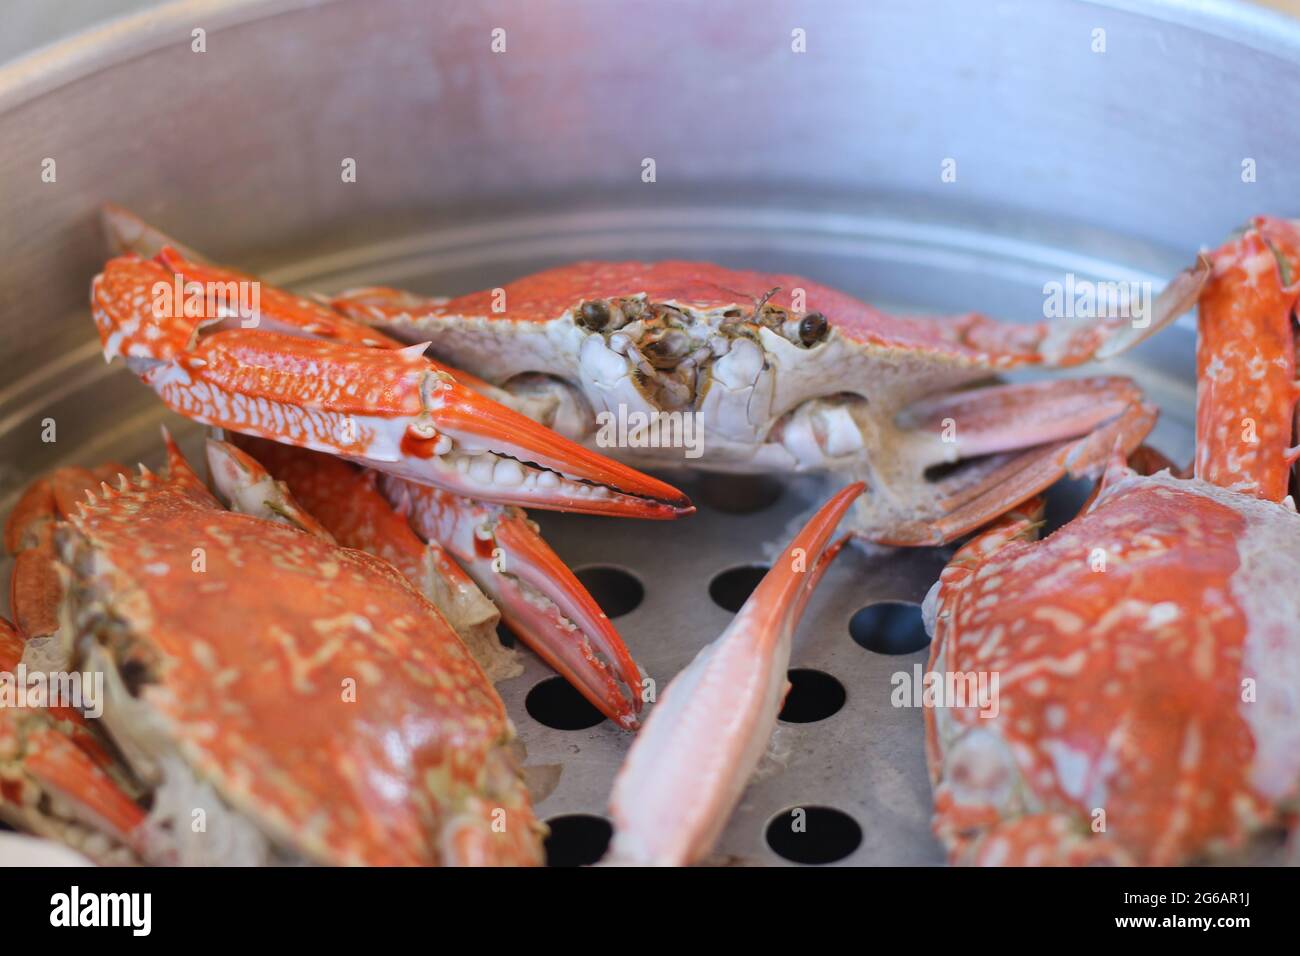 Steamed crabs focus on their large claws. Crab is a popular seafood that is steamed and cooked to eat. Stock Photo